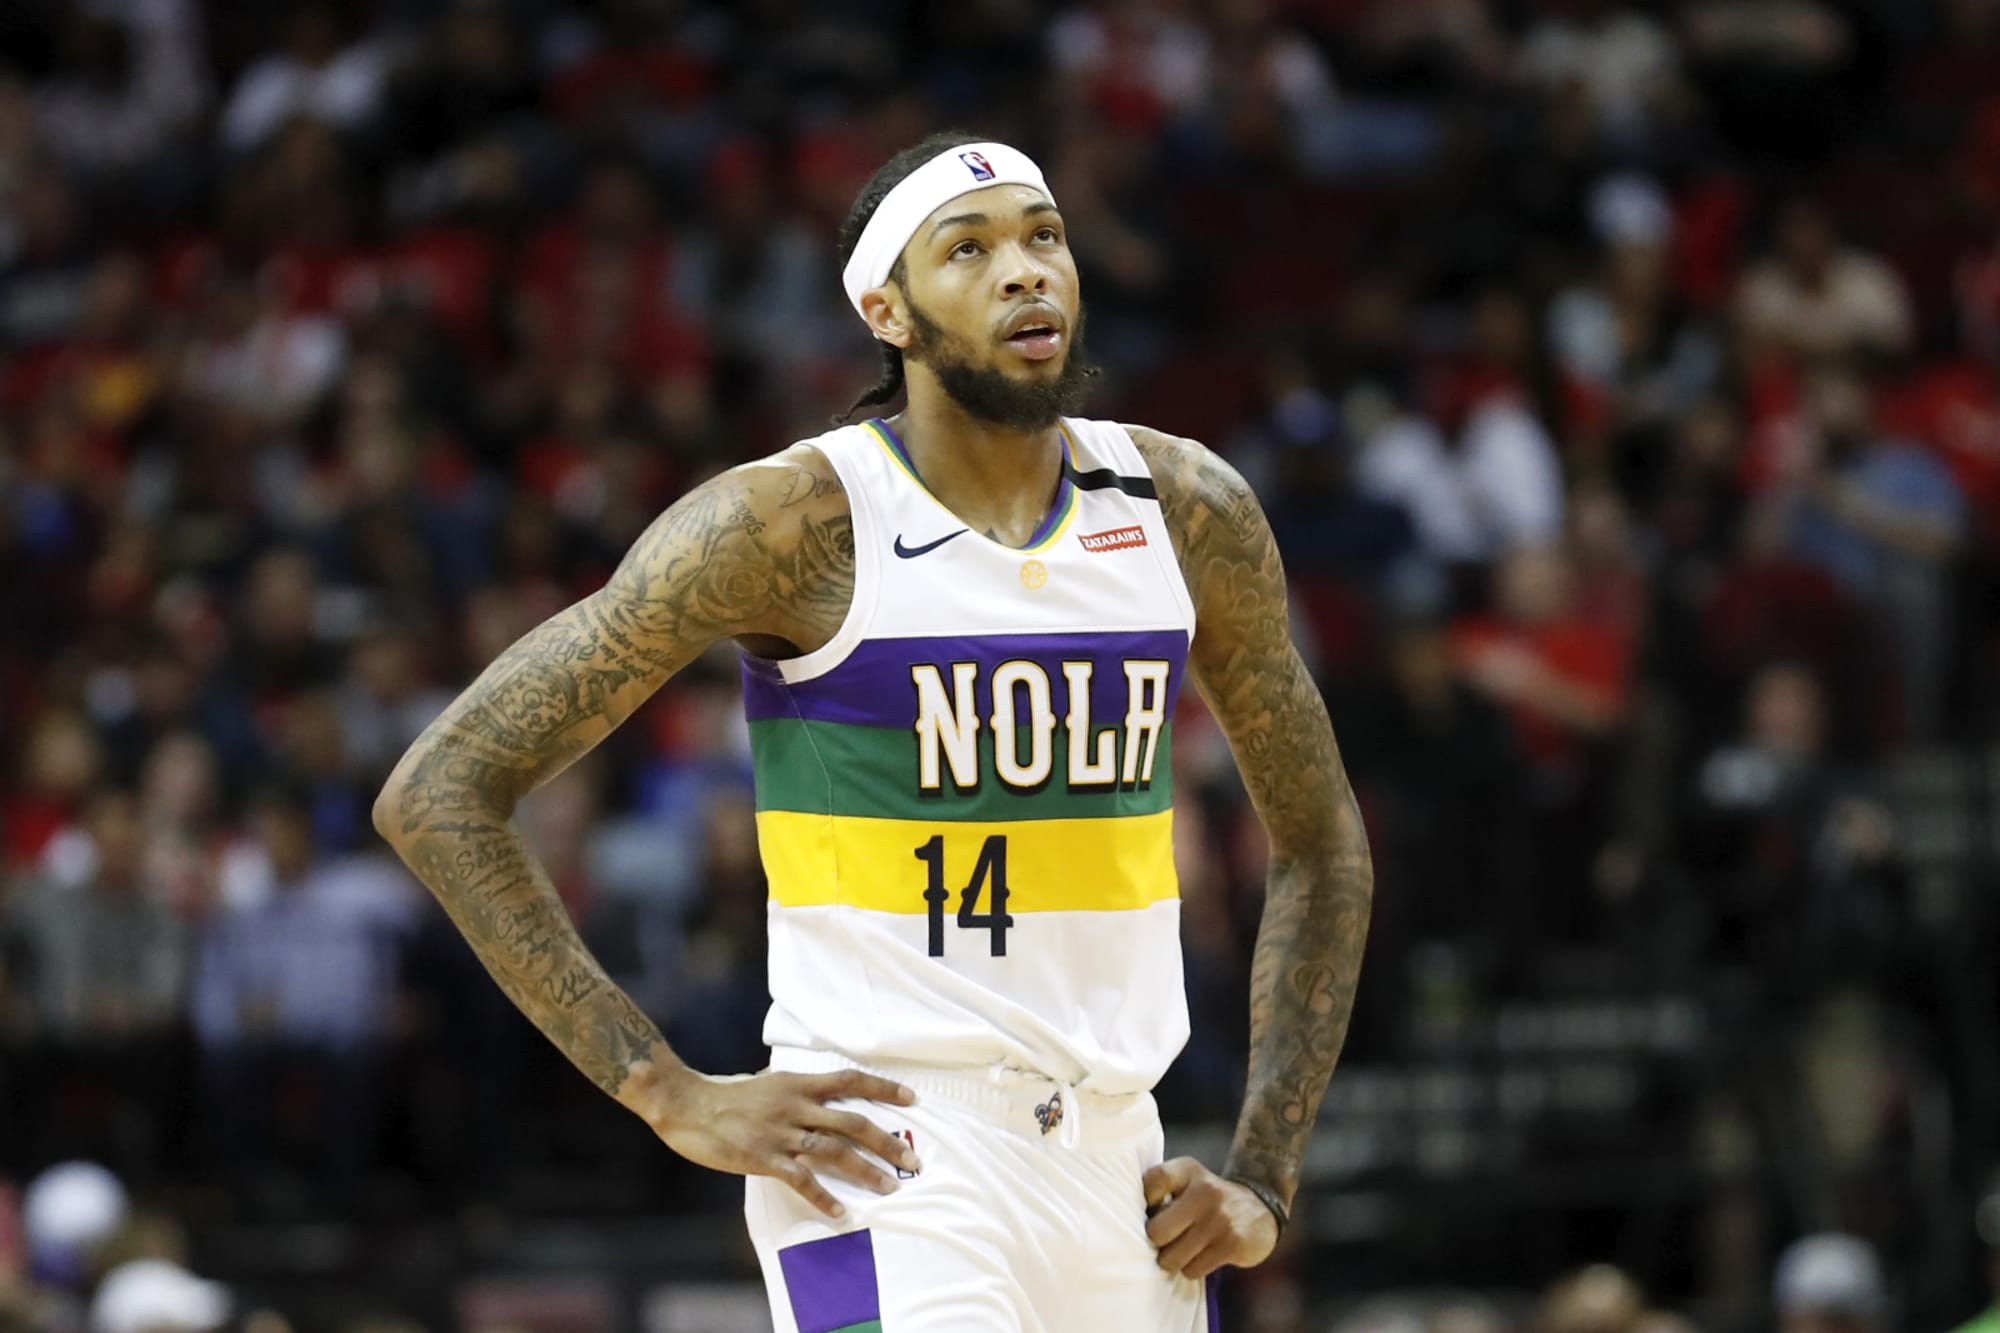 Pelicans Brandon Ingram deserves a max contract, but will not get one